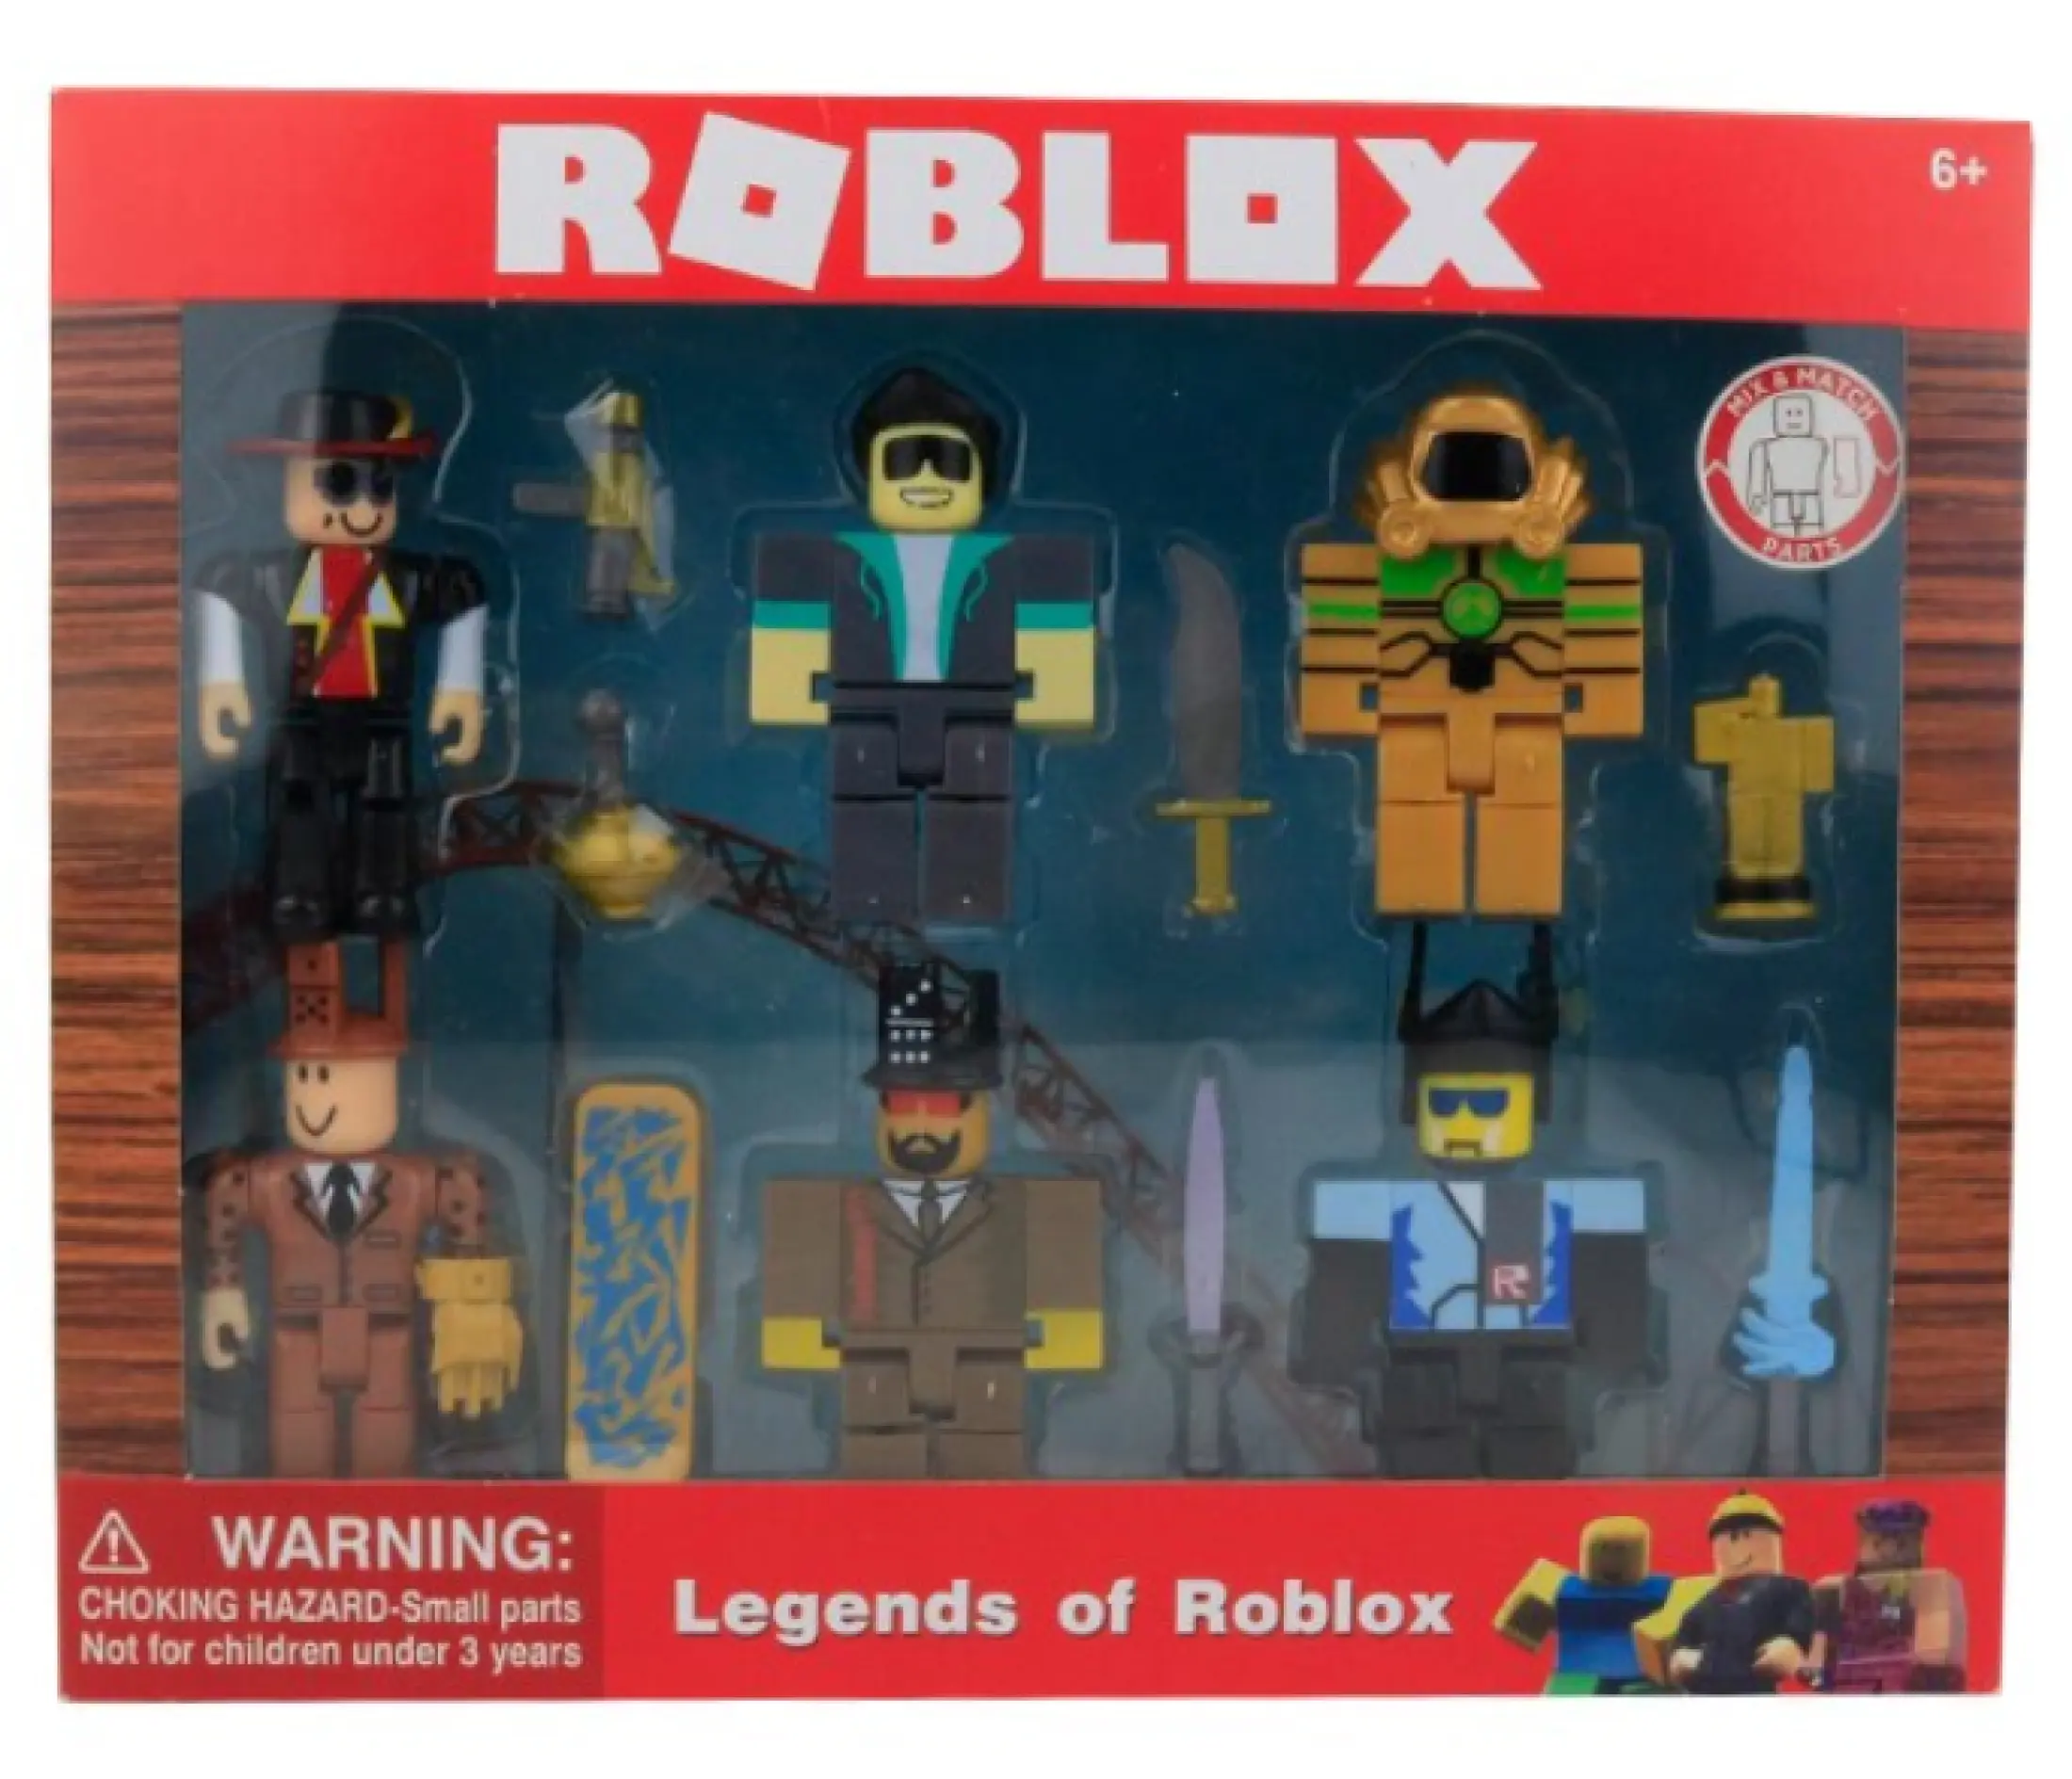 Birthday Gift Roblox Toys For Boys Legends Of Roblox Toys Figures Full Set No Code And Neverland Lagoon Set Lazada Ph - roblox toy design your roblox toy